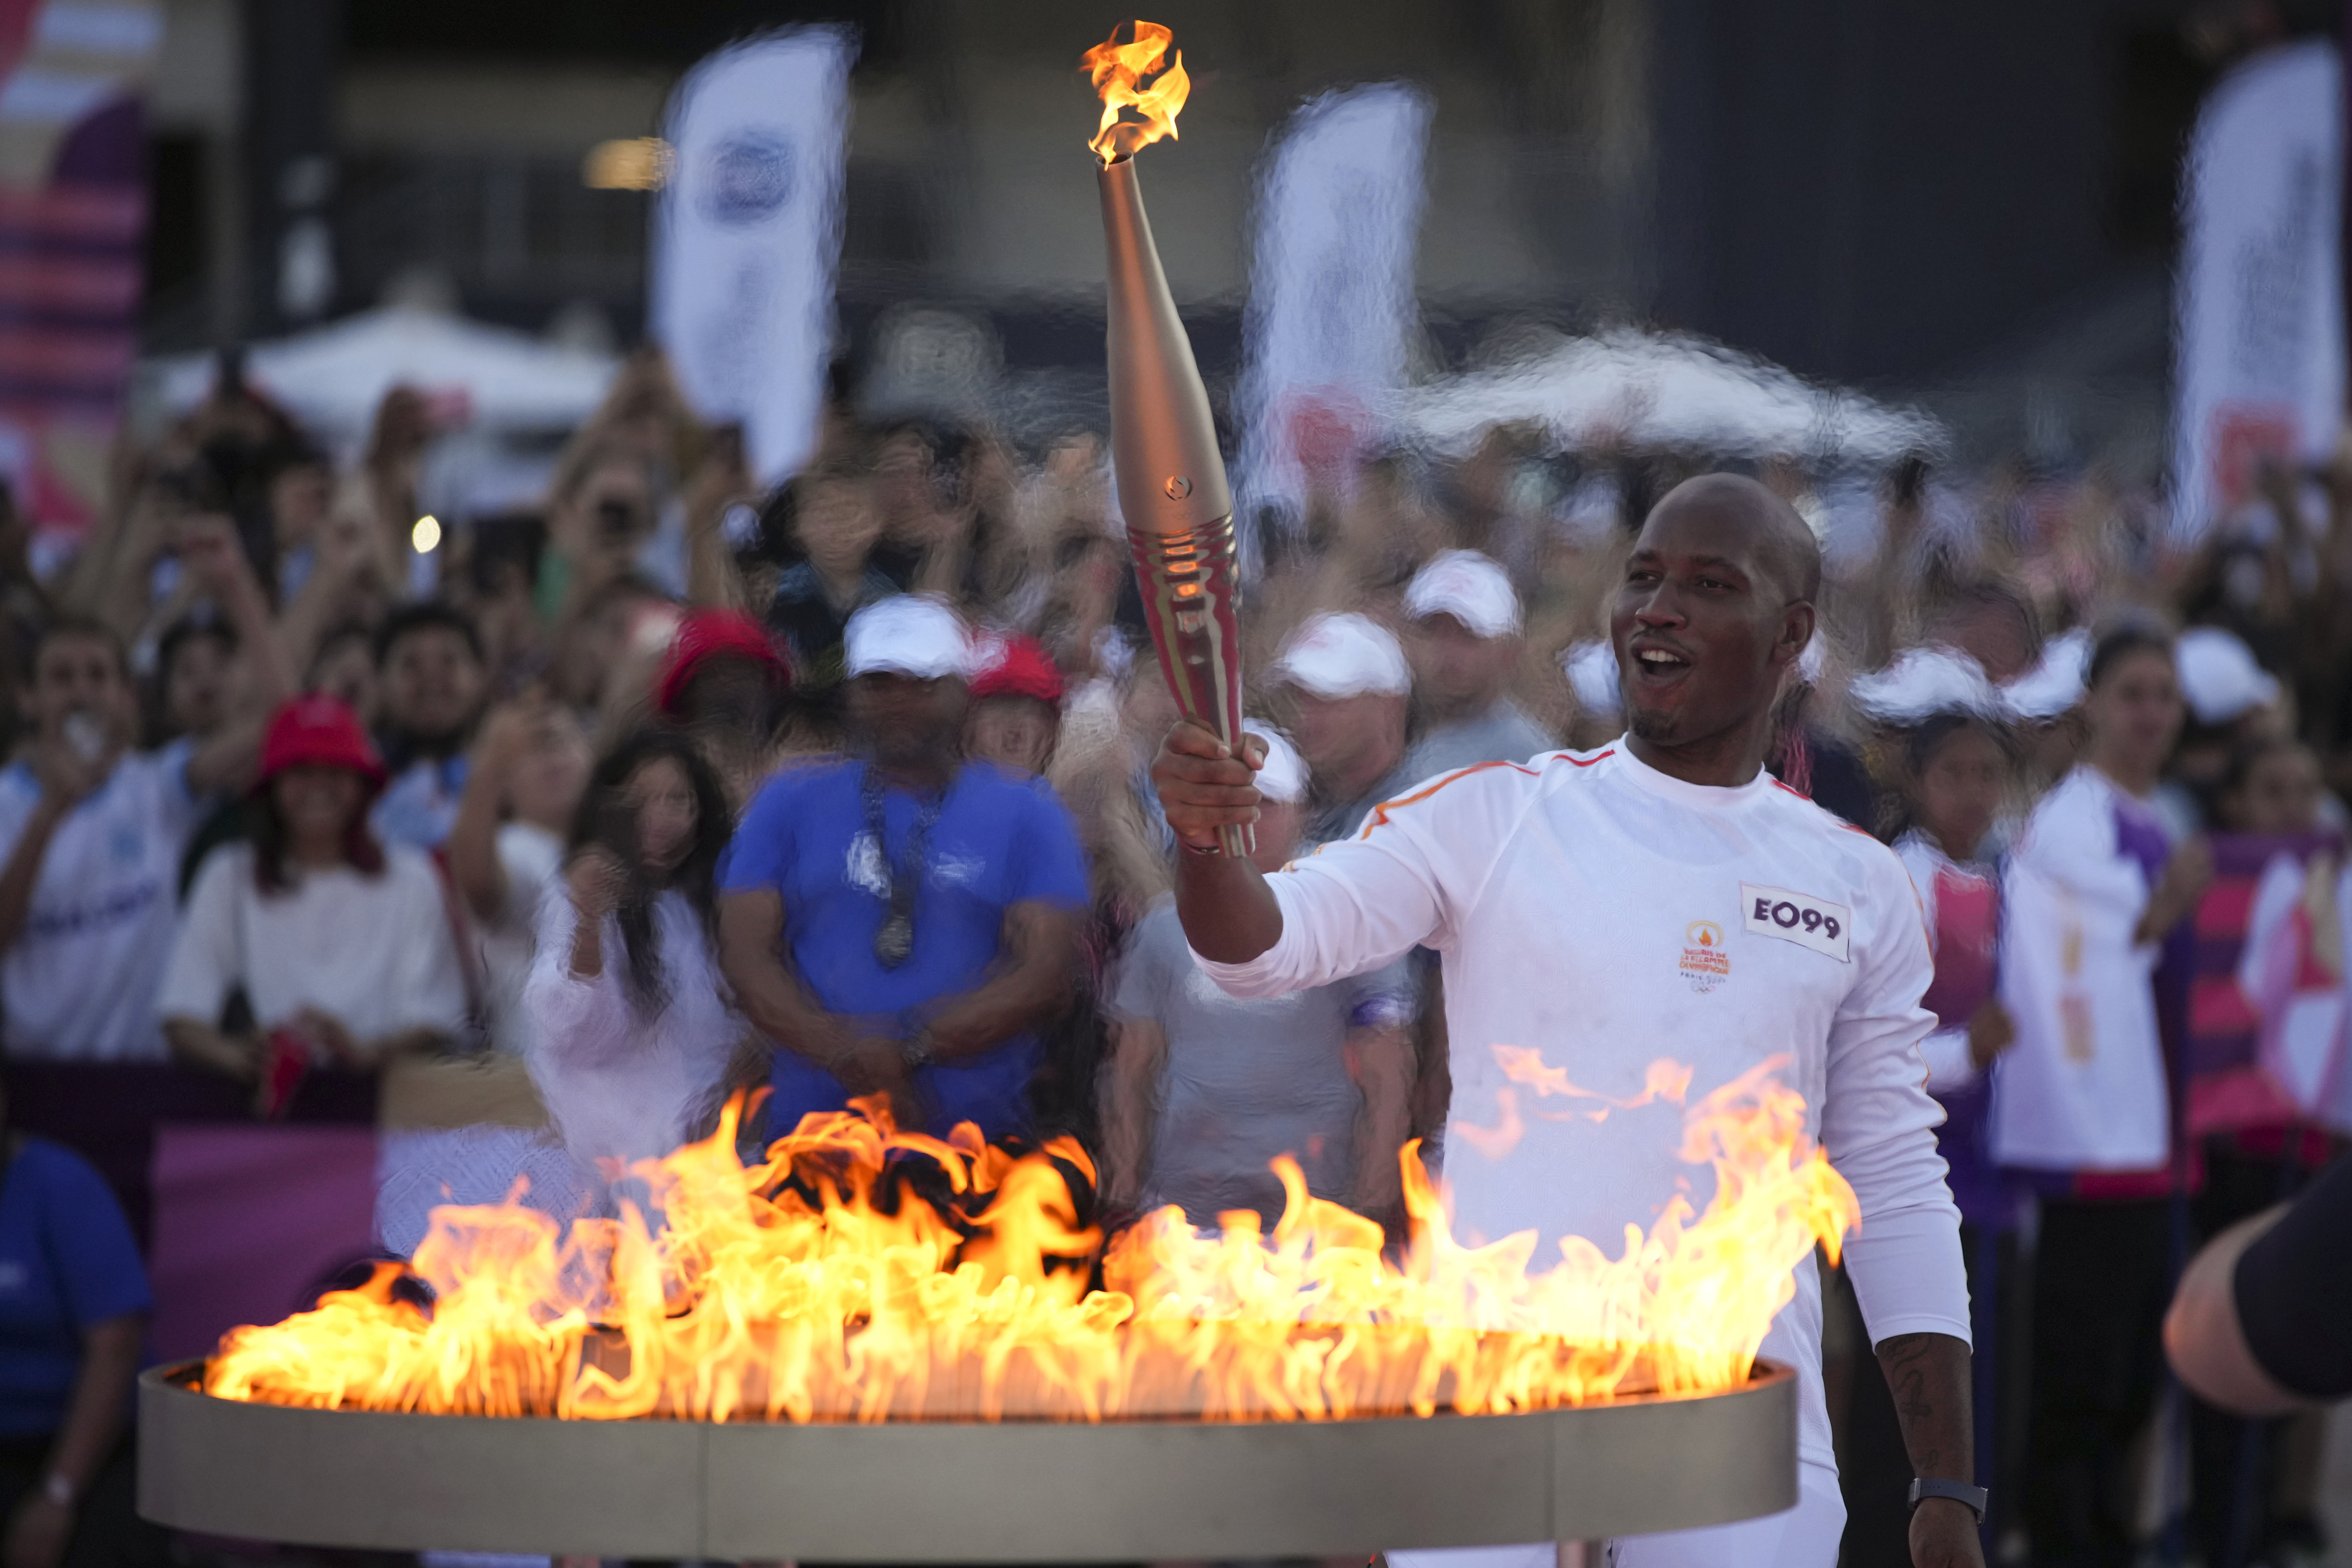 Countdown starts as Olympic Torch begins 11-week journey